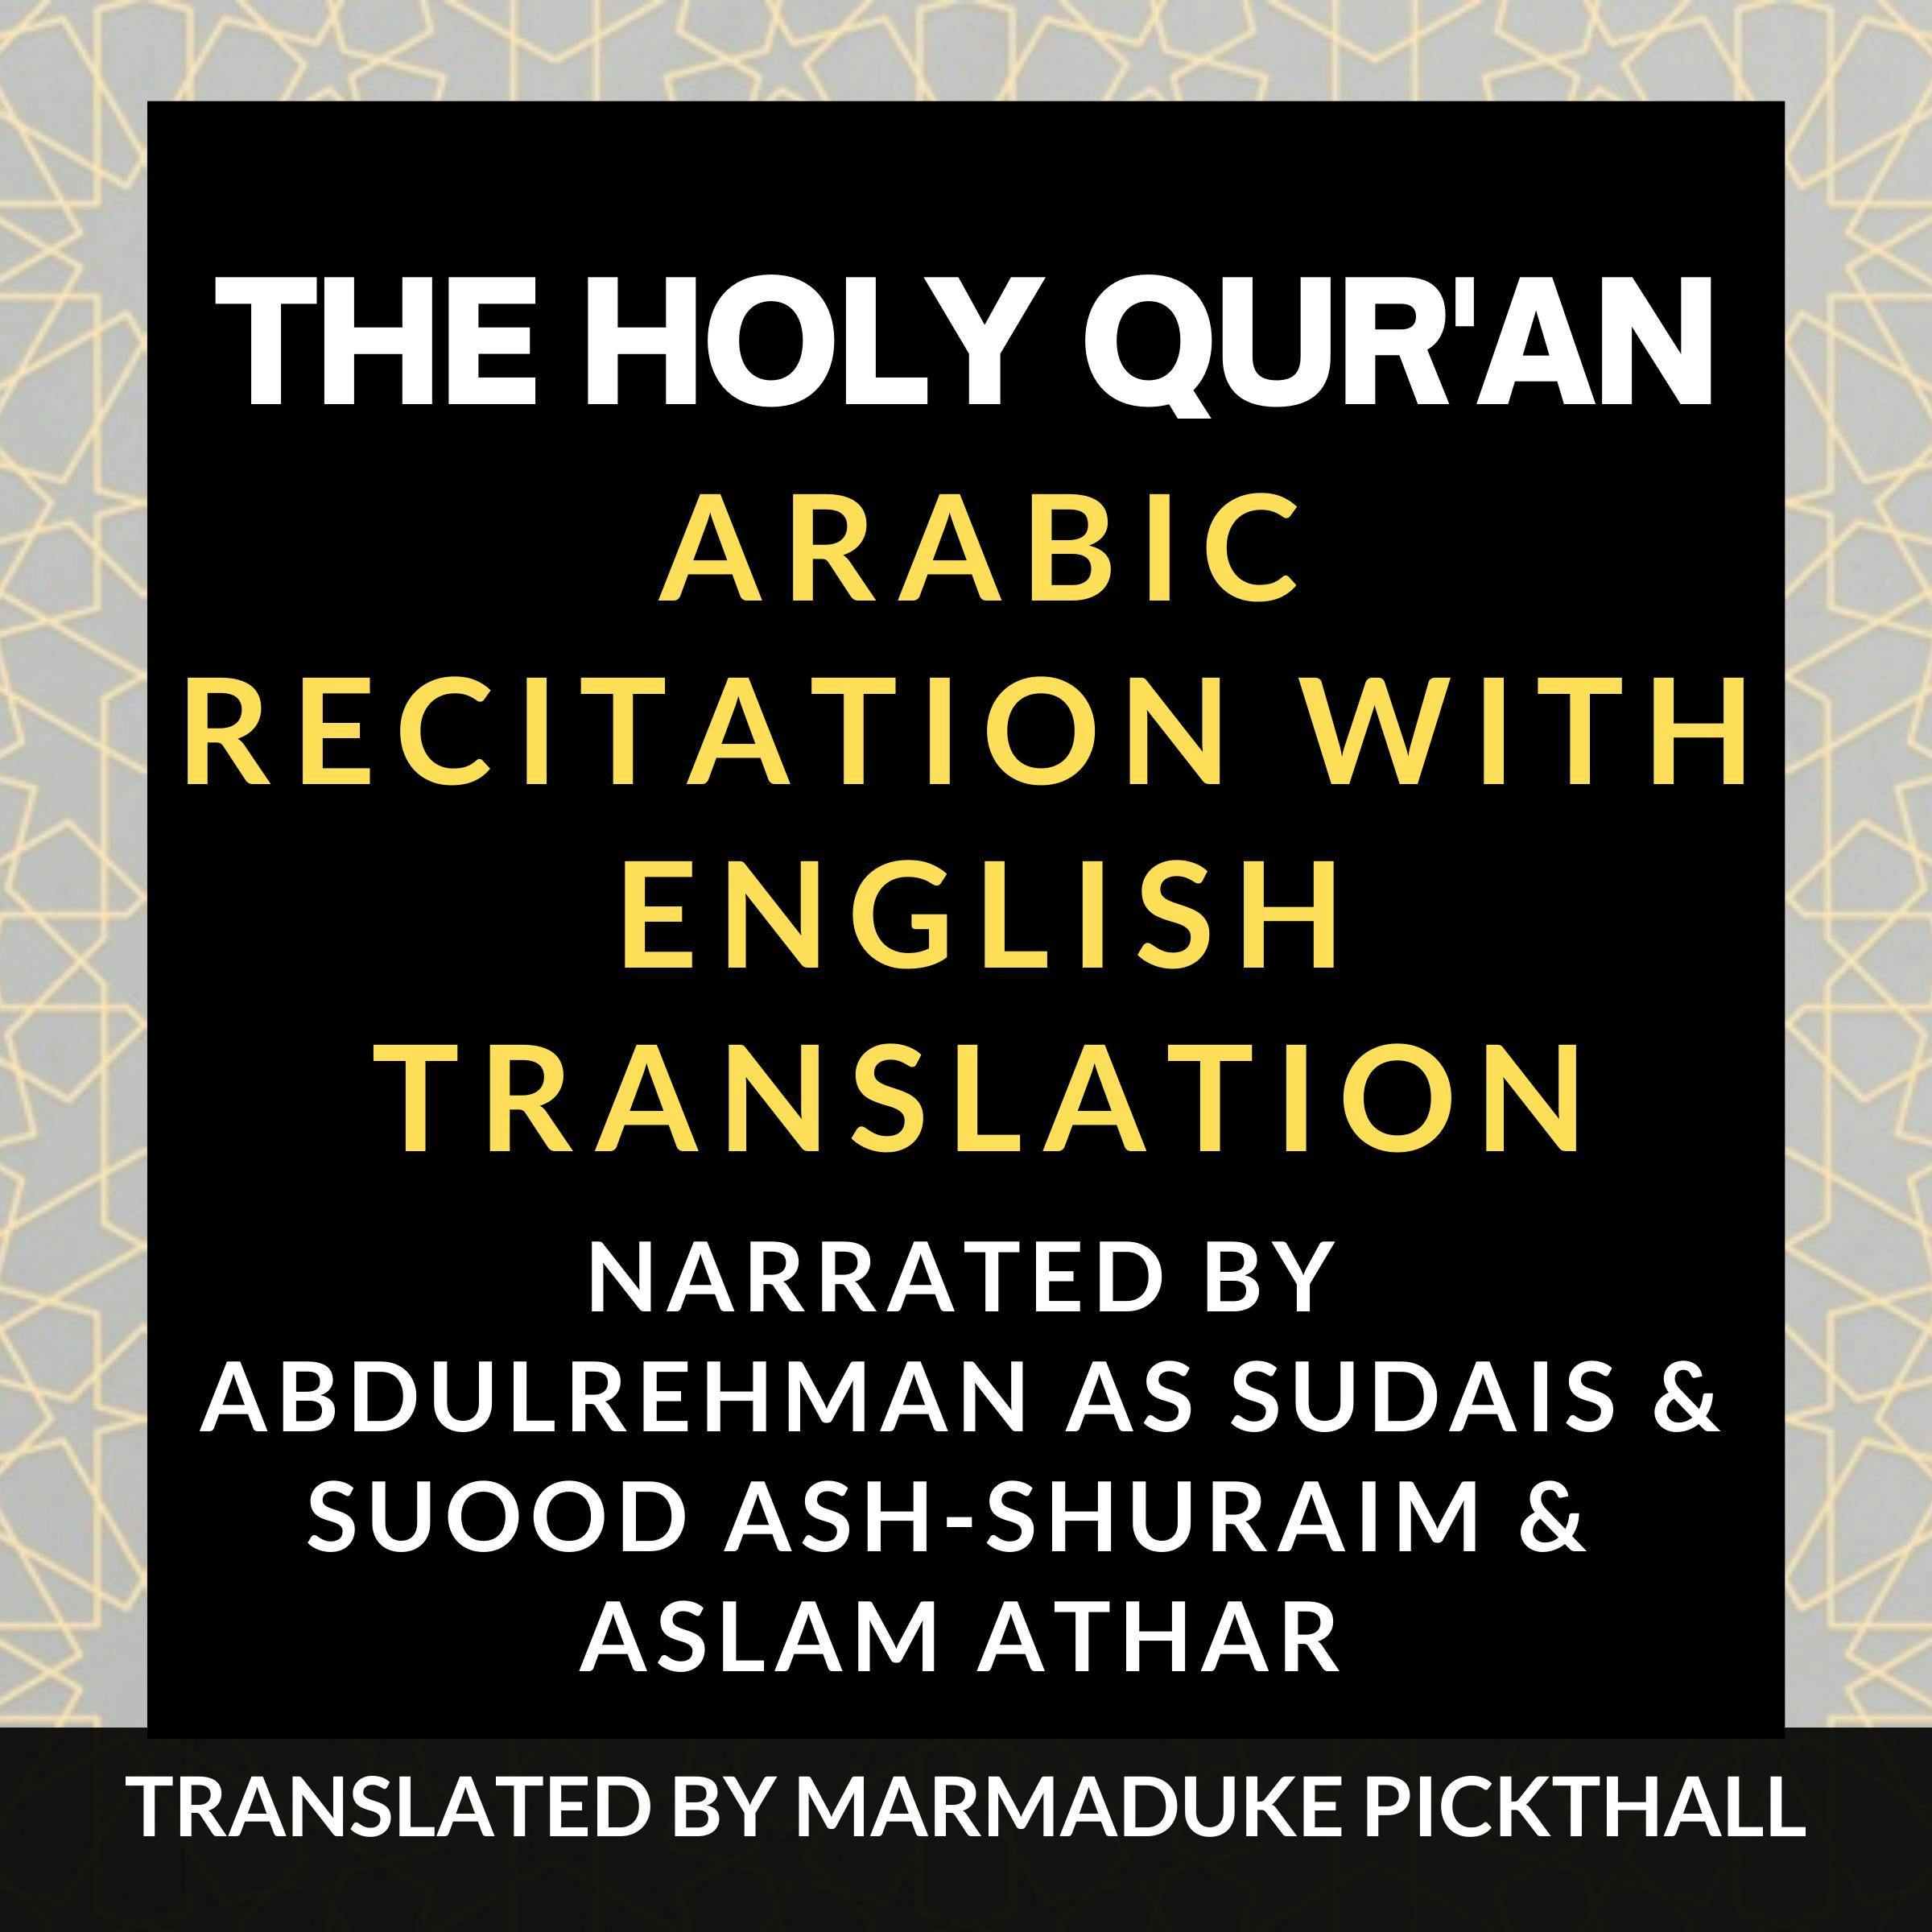 The Holy Qur'an [Arabic with English Translation]: Translated by Marmaduke Pickthall - Translator - Marmaduke Pickthall, The Holy Quran